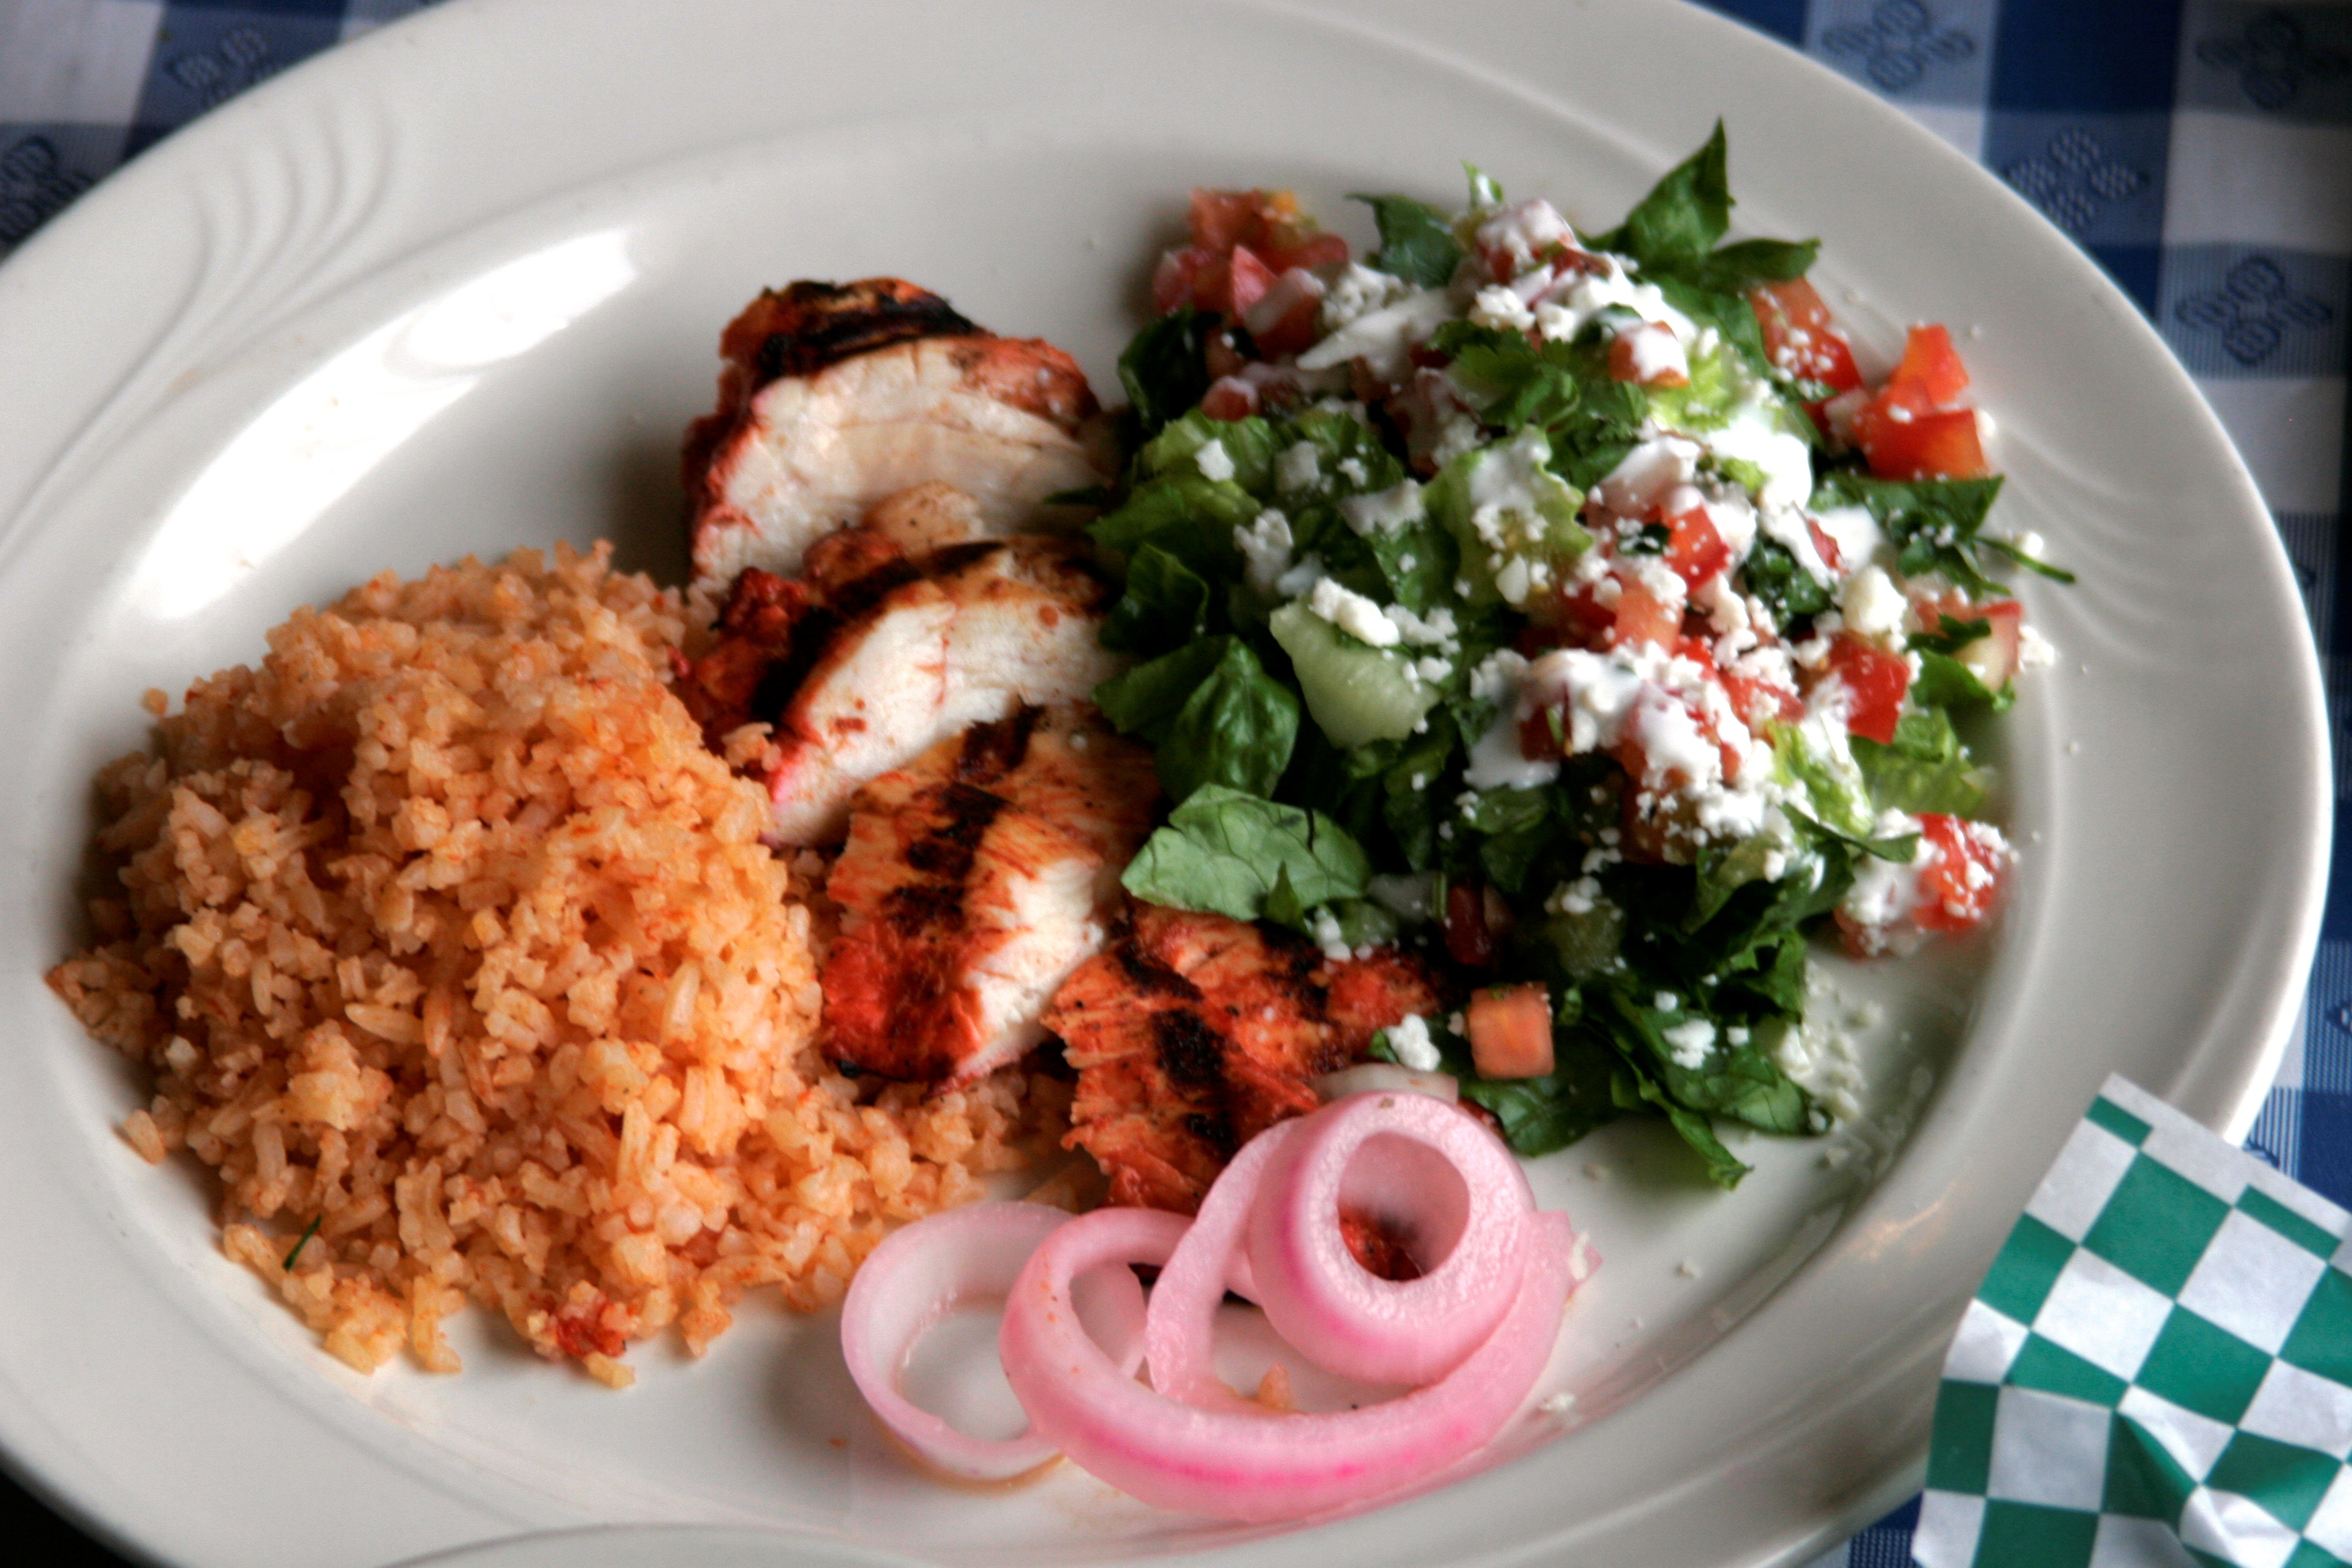 Grilled Pollo in Axiote at Itacate-Penfield.jpg